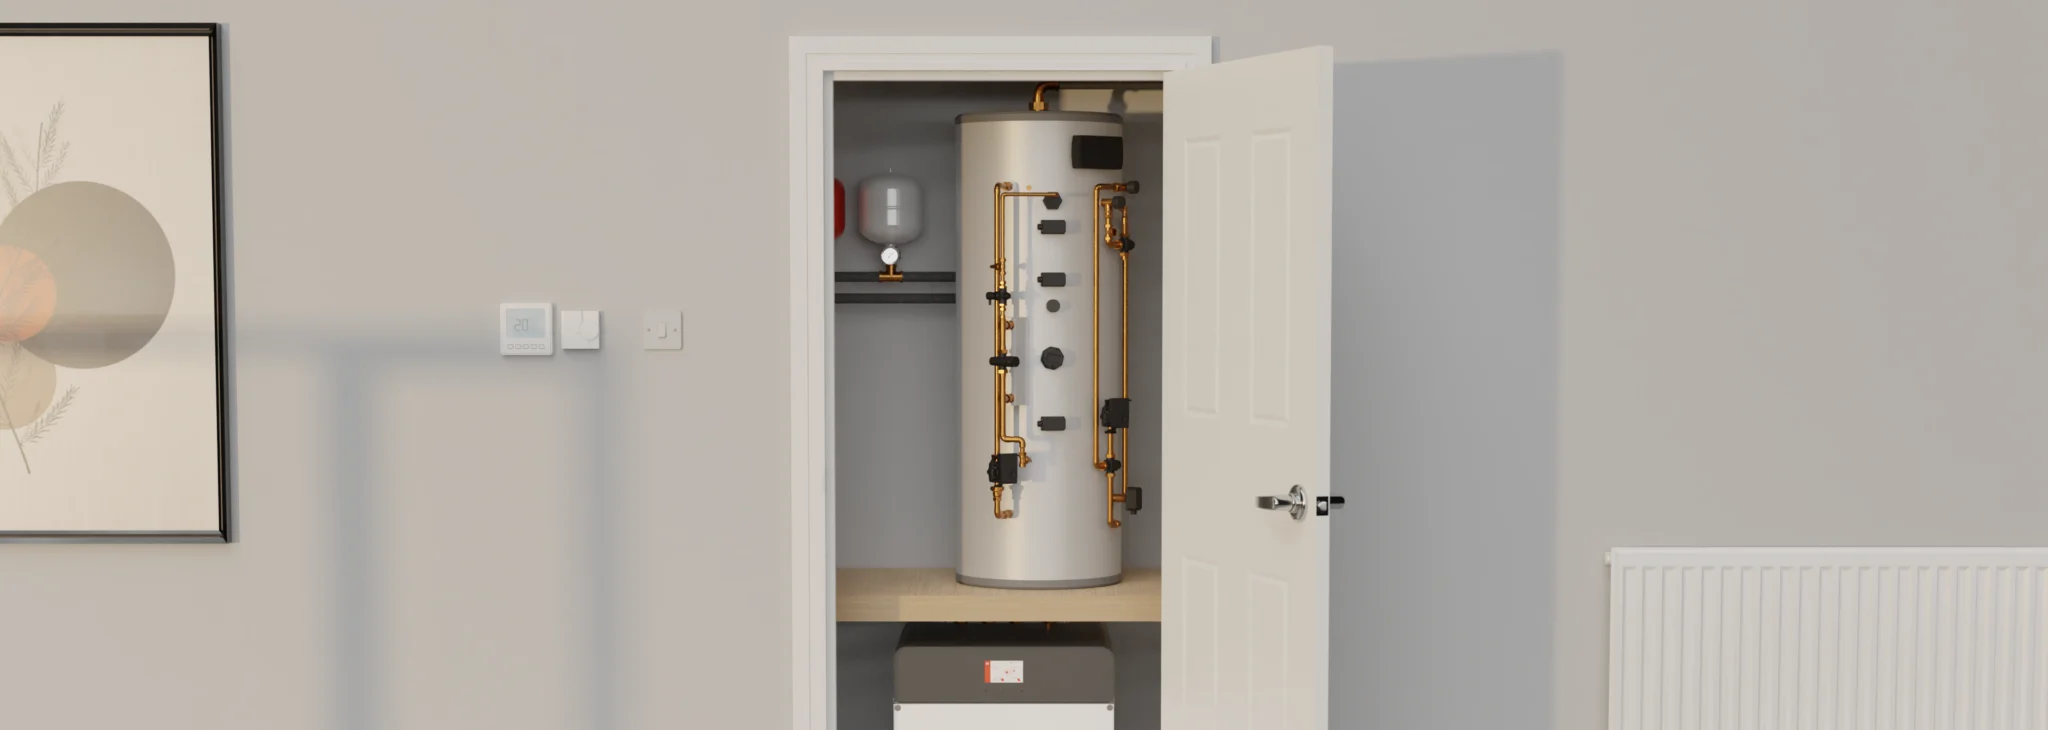 Major Partnership to Deliver Heat Pumps to Thousands of New Builds